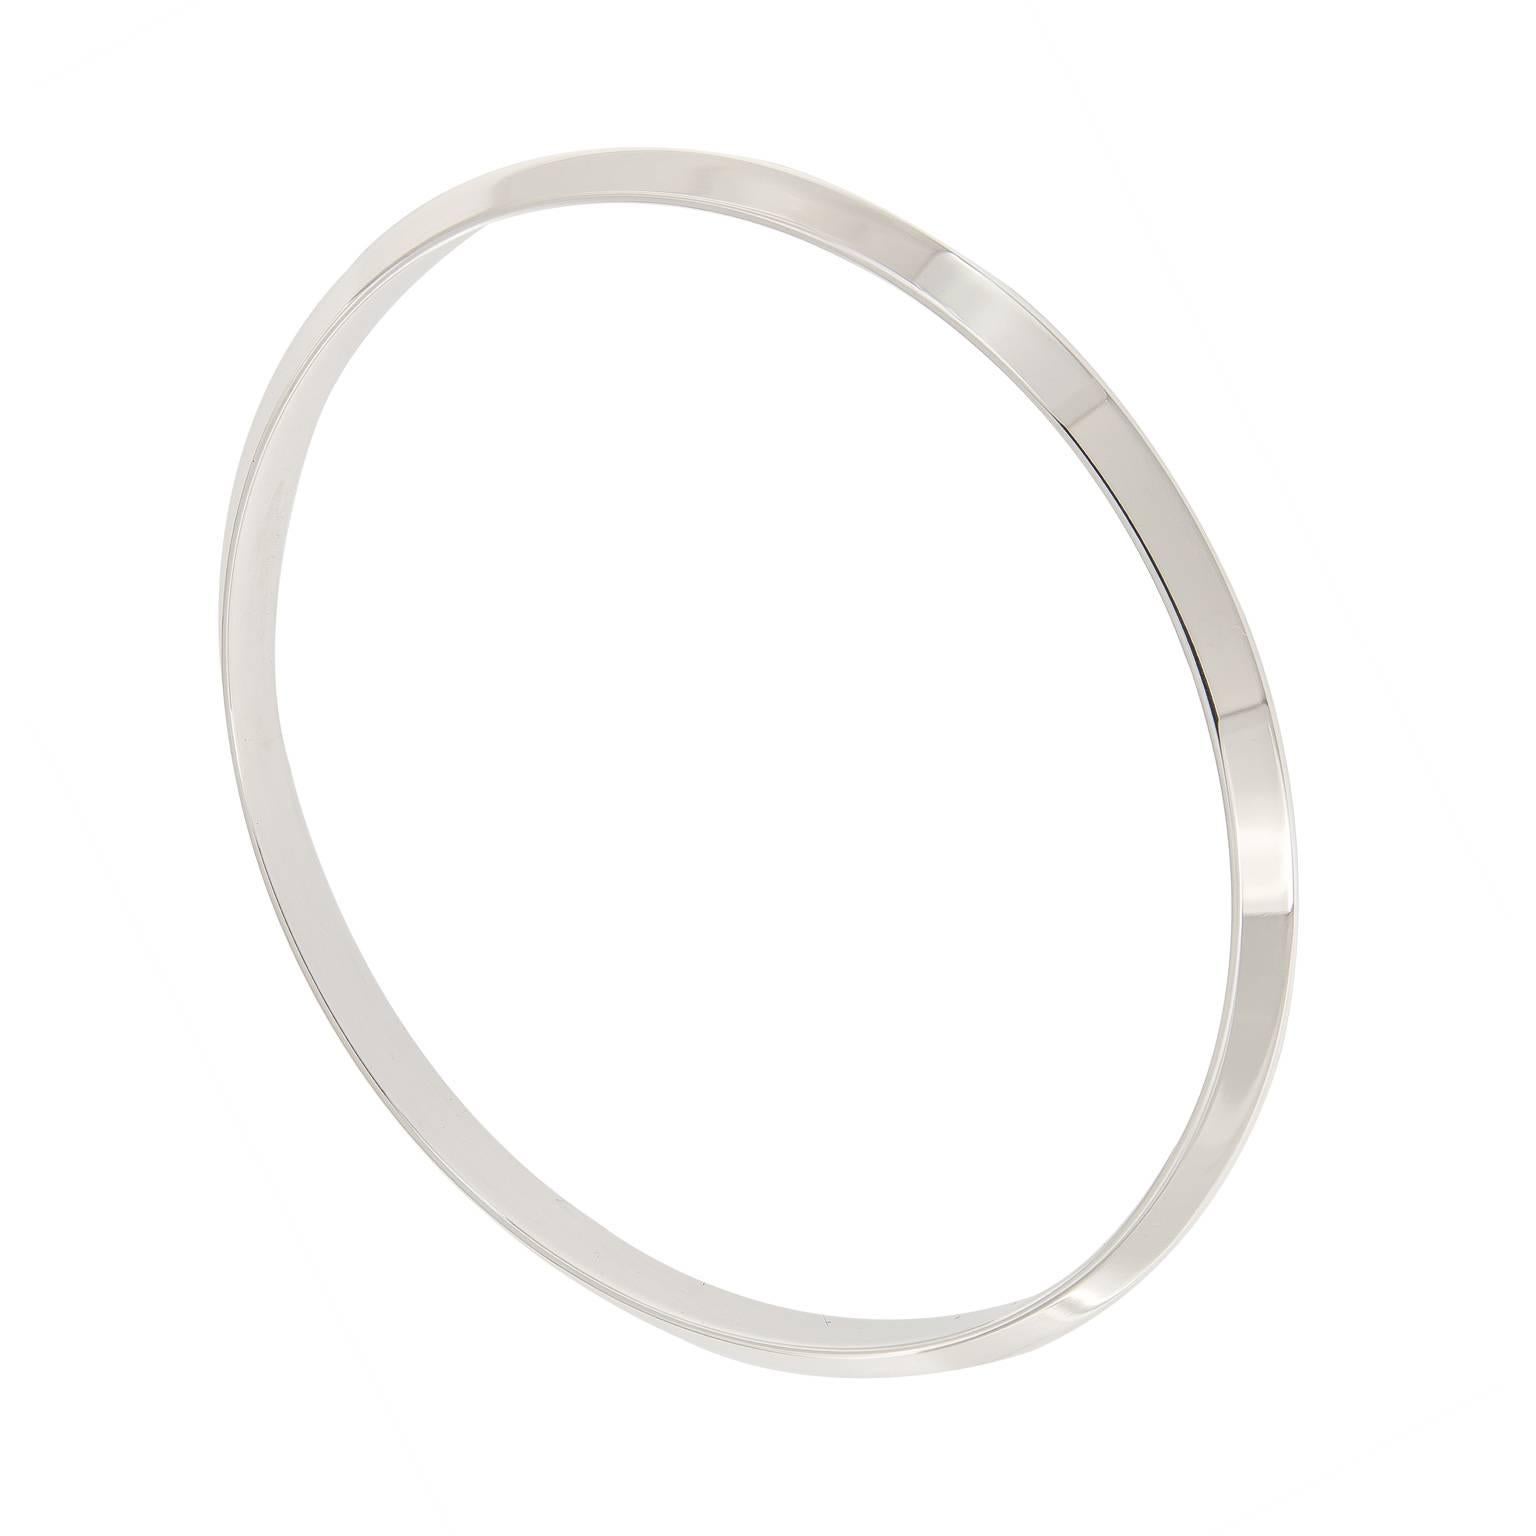 Signature style bangle bracelets from Tiffany. This bracelet is simple and classic on its own or great for stacking. We have only 2 left & available. 

Inner Diameter 2.5 in. (6.35 cm). Weighs 16.7 grams.

Marked Tiffany & Co.